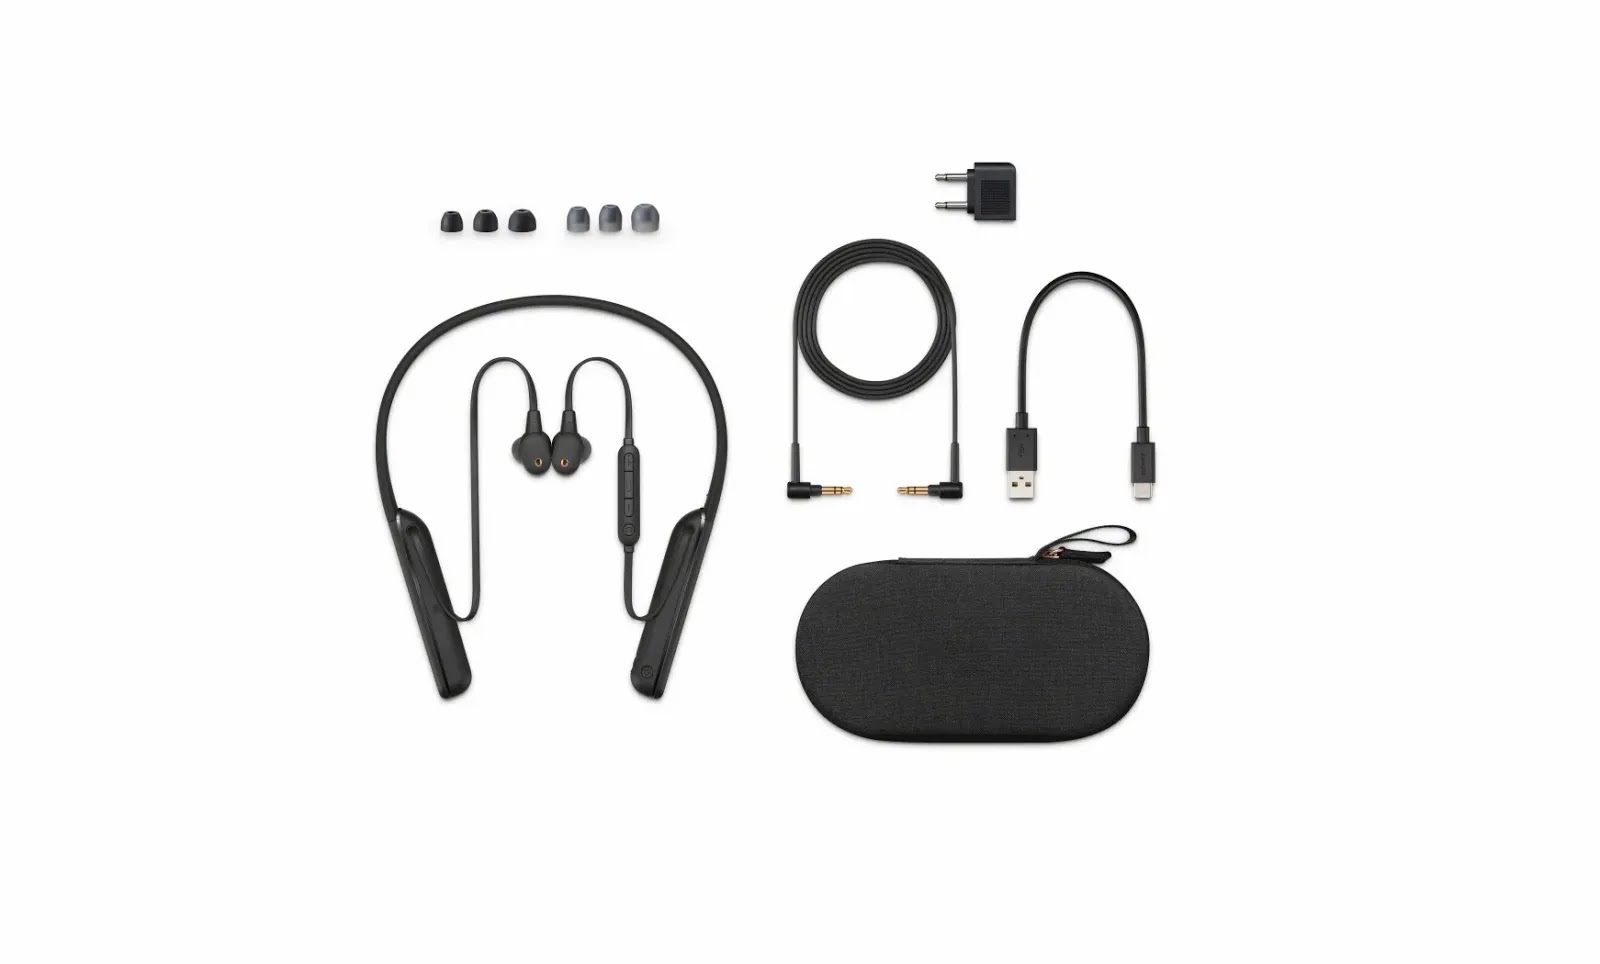 Sony WI-1000XM2, In-Ear Wireless Noise Cancelation Headphones Launched